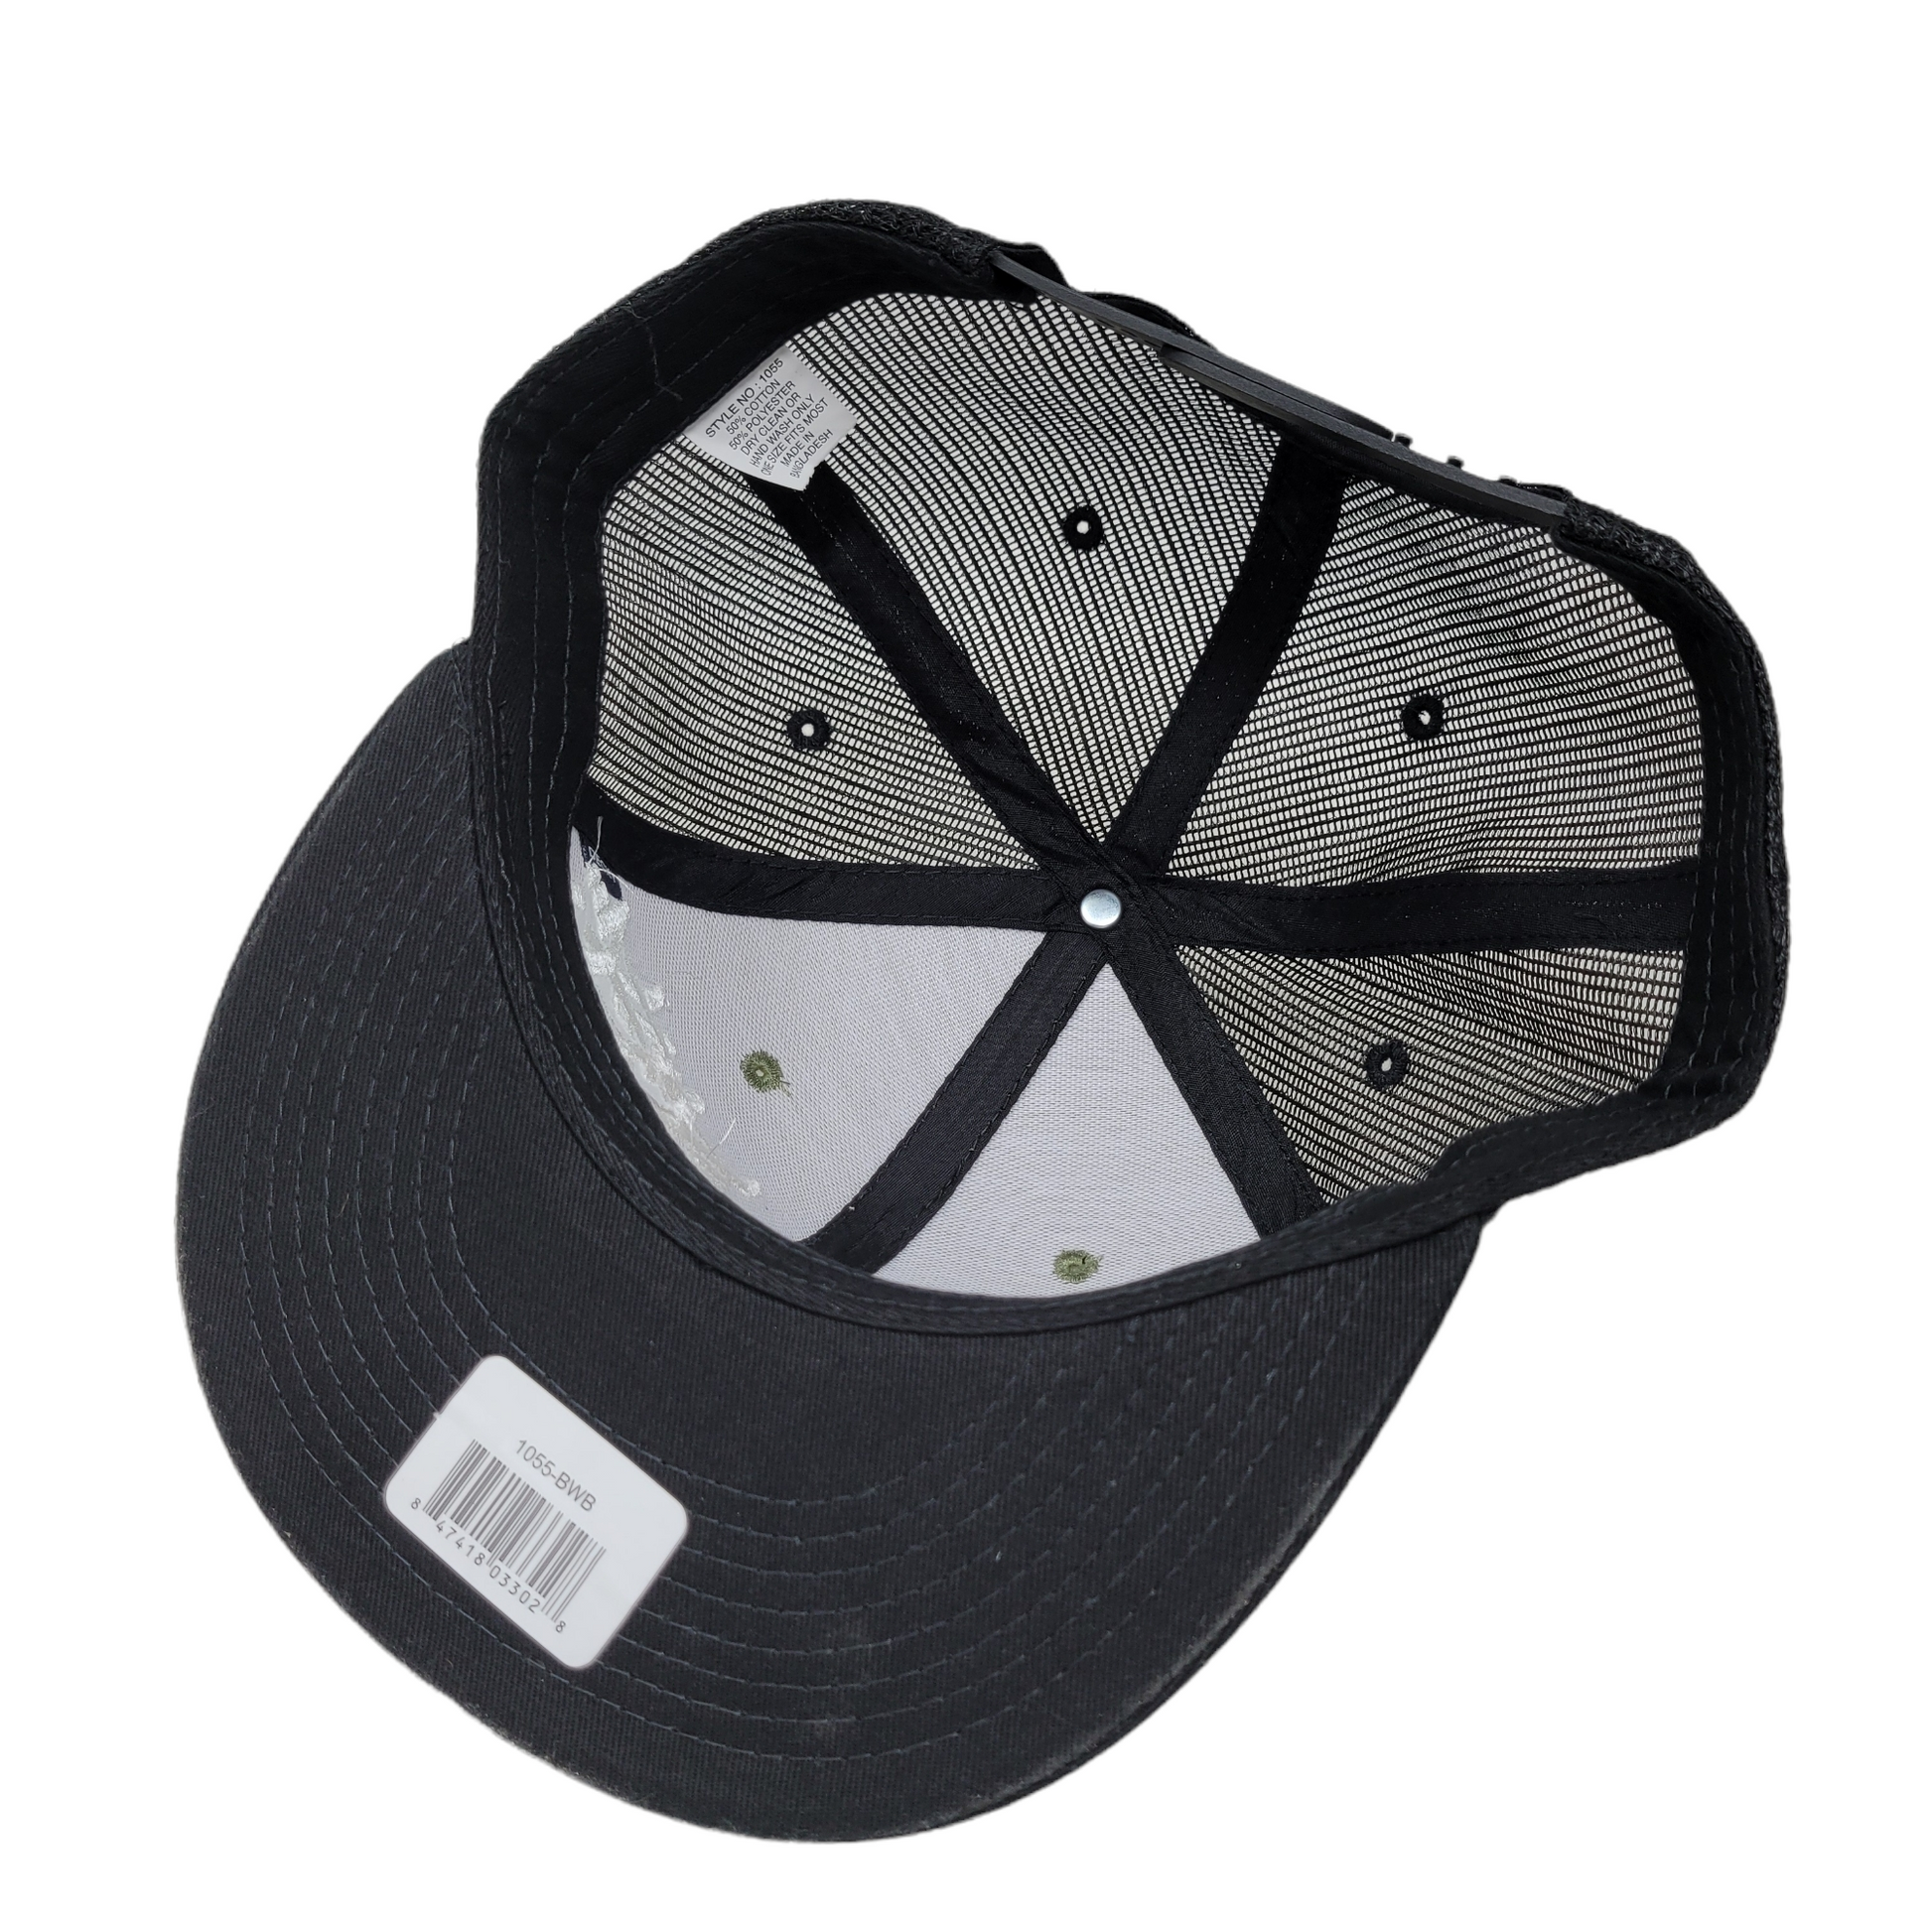 THE FOREST CAMO MESH TAG LOGO SNAPBACK HAT - Panic 39